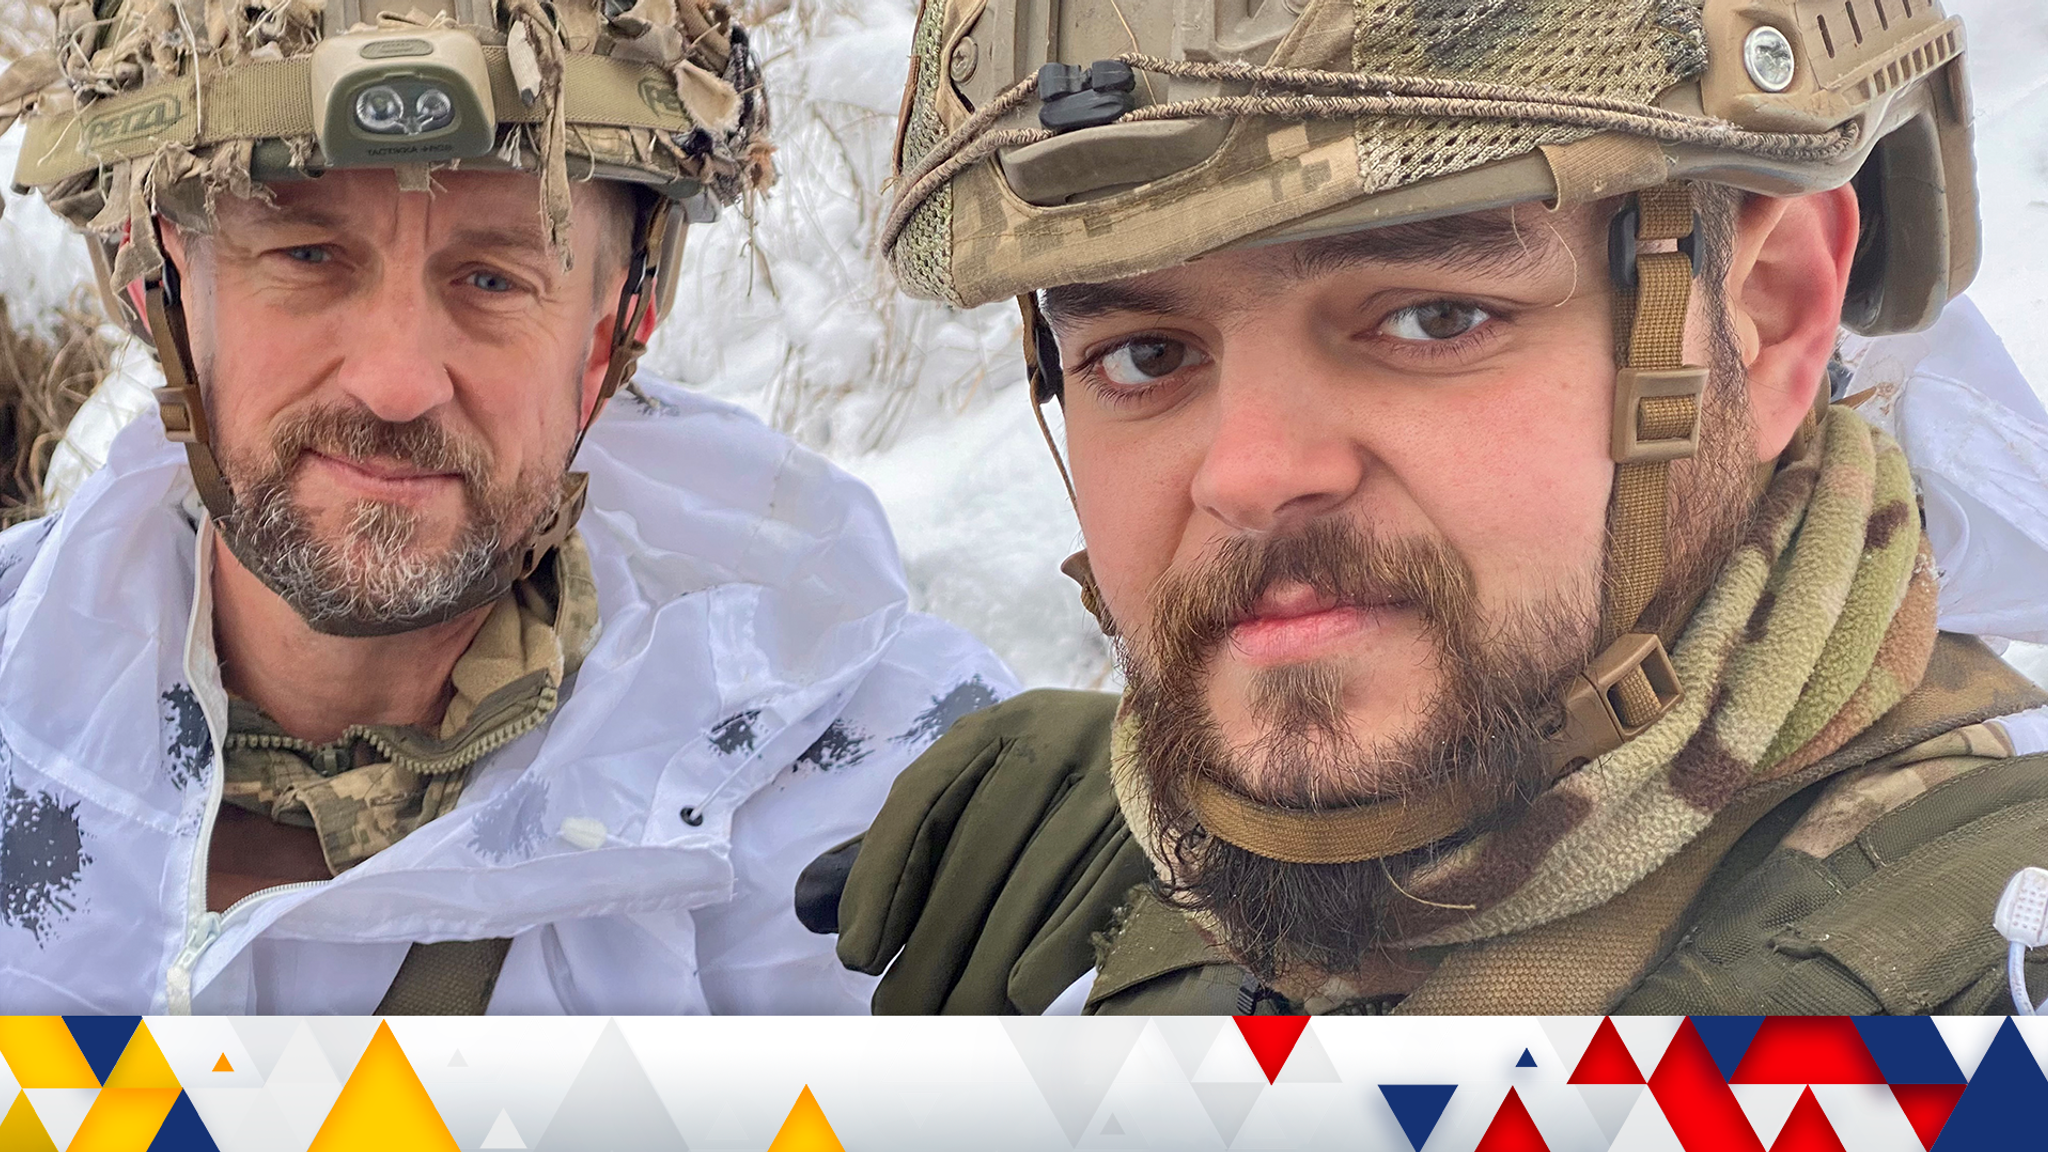 Ukrainian Man Calls Russian Tech Support to Help With Captured